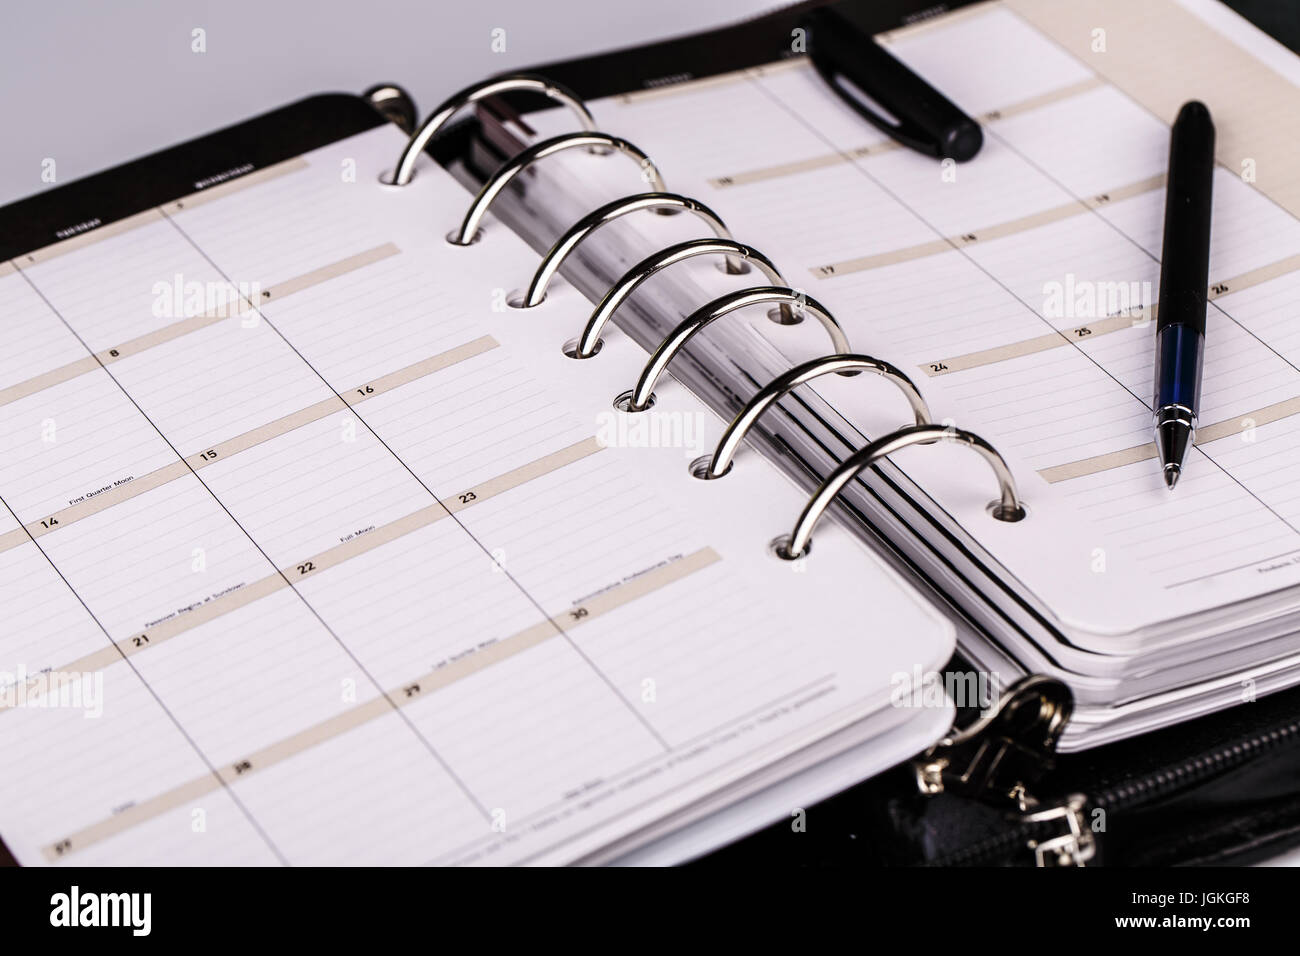 luxury executive leather personal organizer or planner on white background  Stock Photo - Alamy